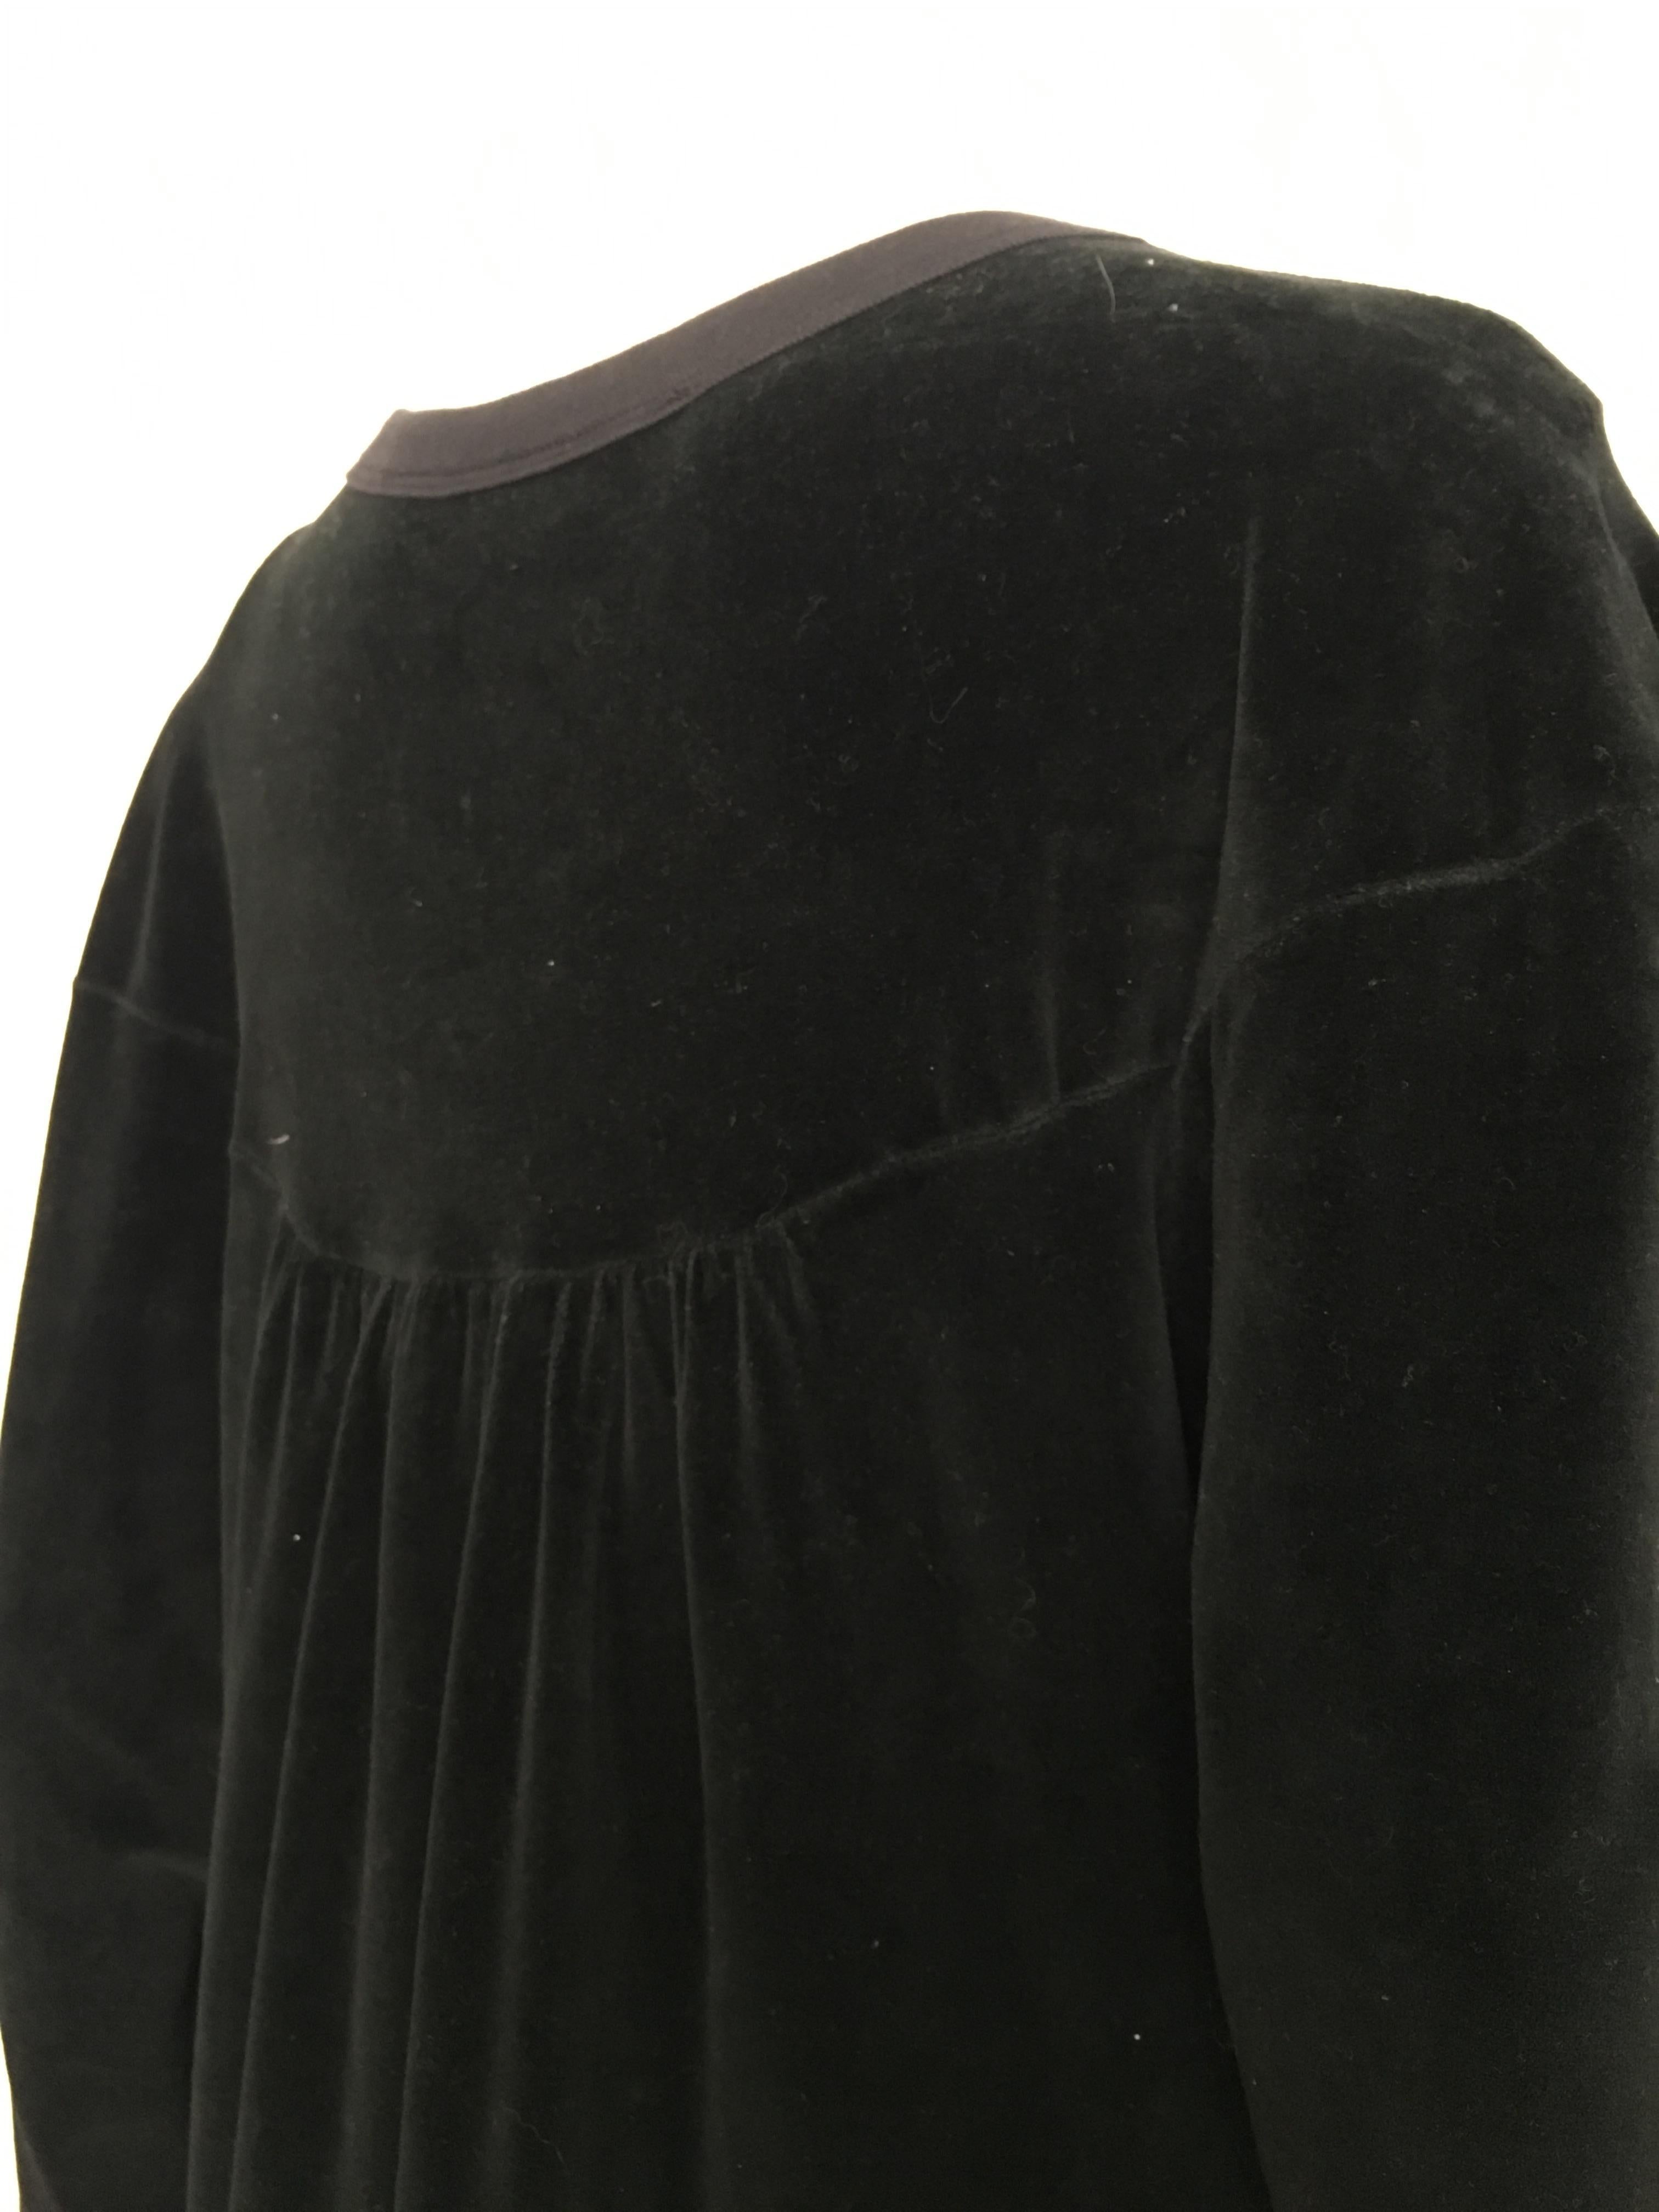 Sonia Rykiel 1980s Black Velour Dress with Pockets & Cardigan Size Large. For Sale 5